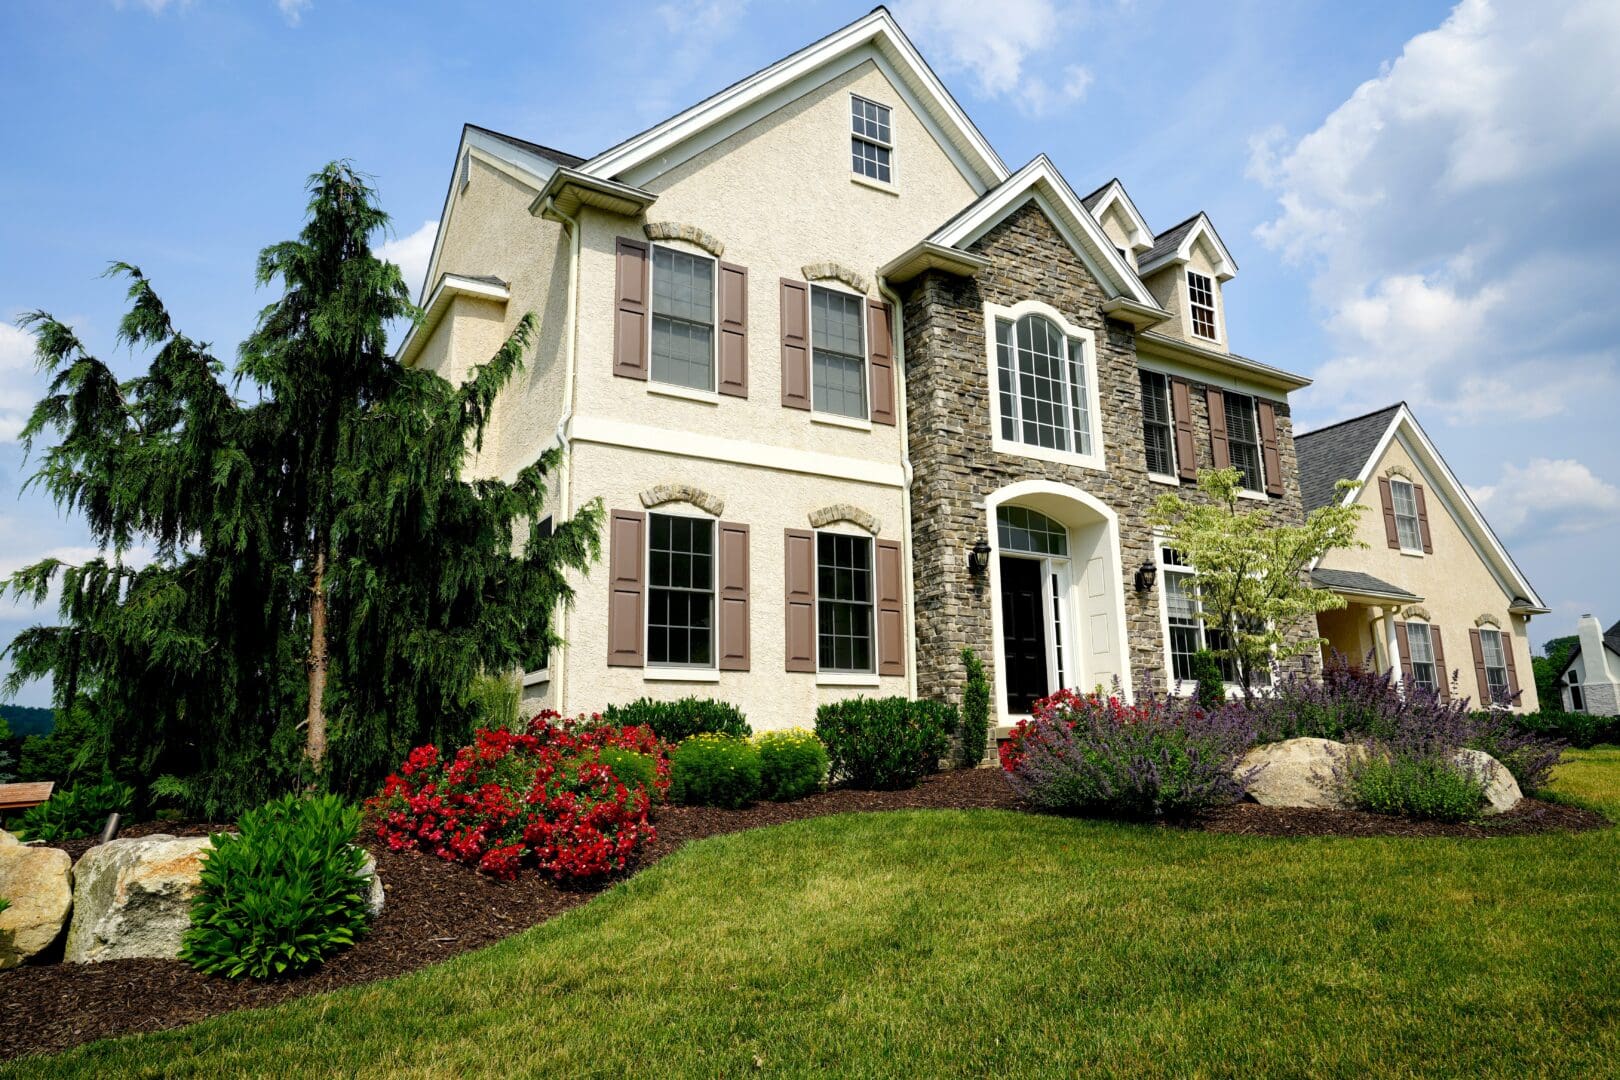 A house with expertly maintained landscaping and bushes in front of it, skillfully designed by Planting Professionals.